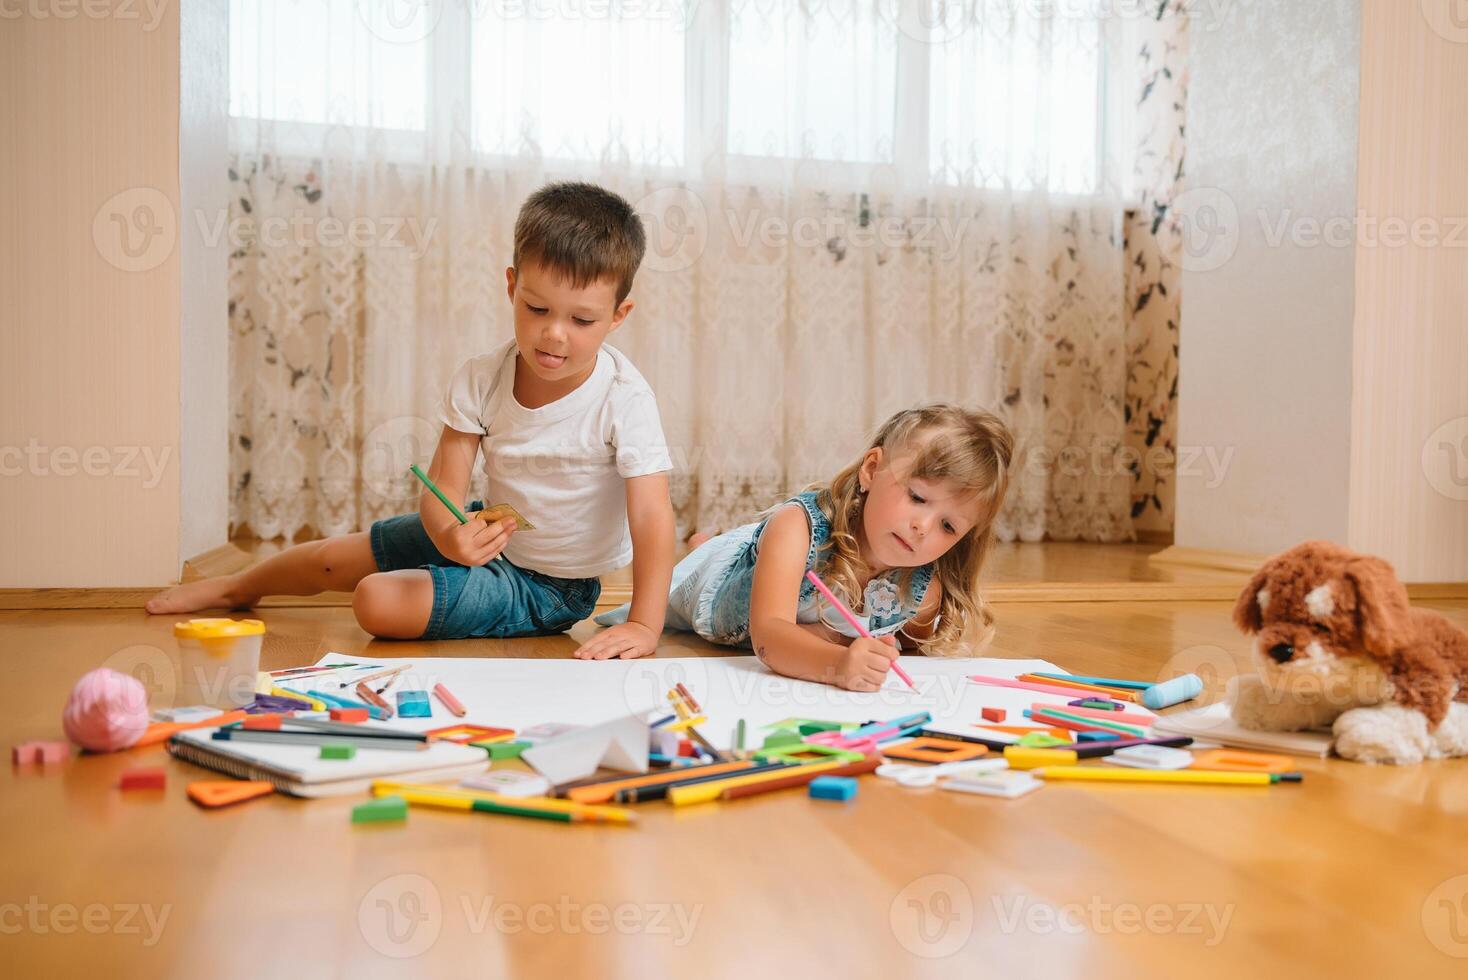 Kids drawing on floor on paper. Preschool boy and girl play on floor with educational toys - blocks, train, railroad, plane. Toys for preschool and kindergarten. Children at home or daycare photo